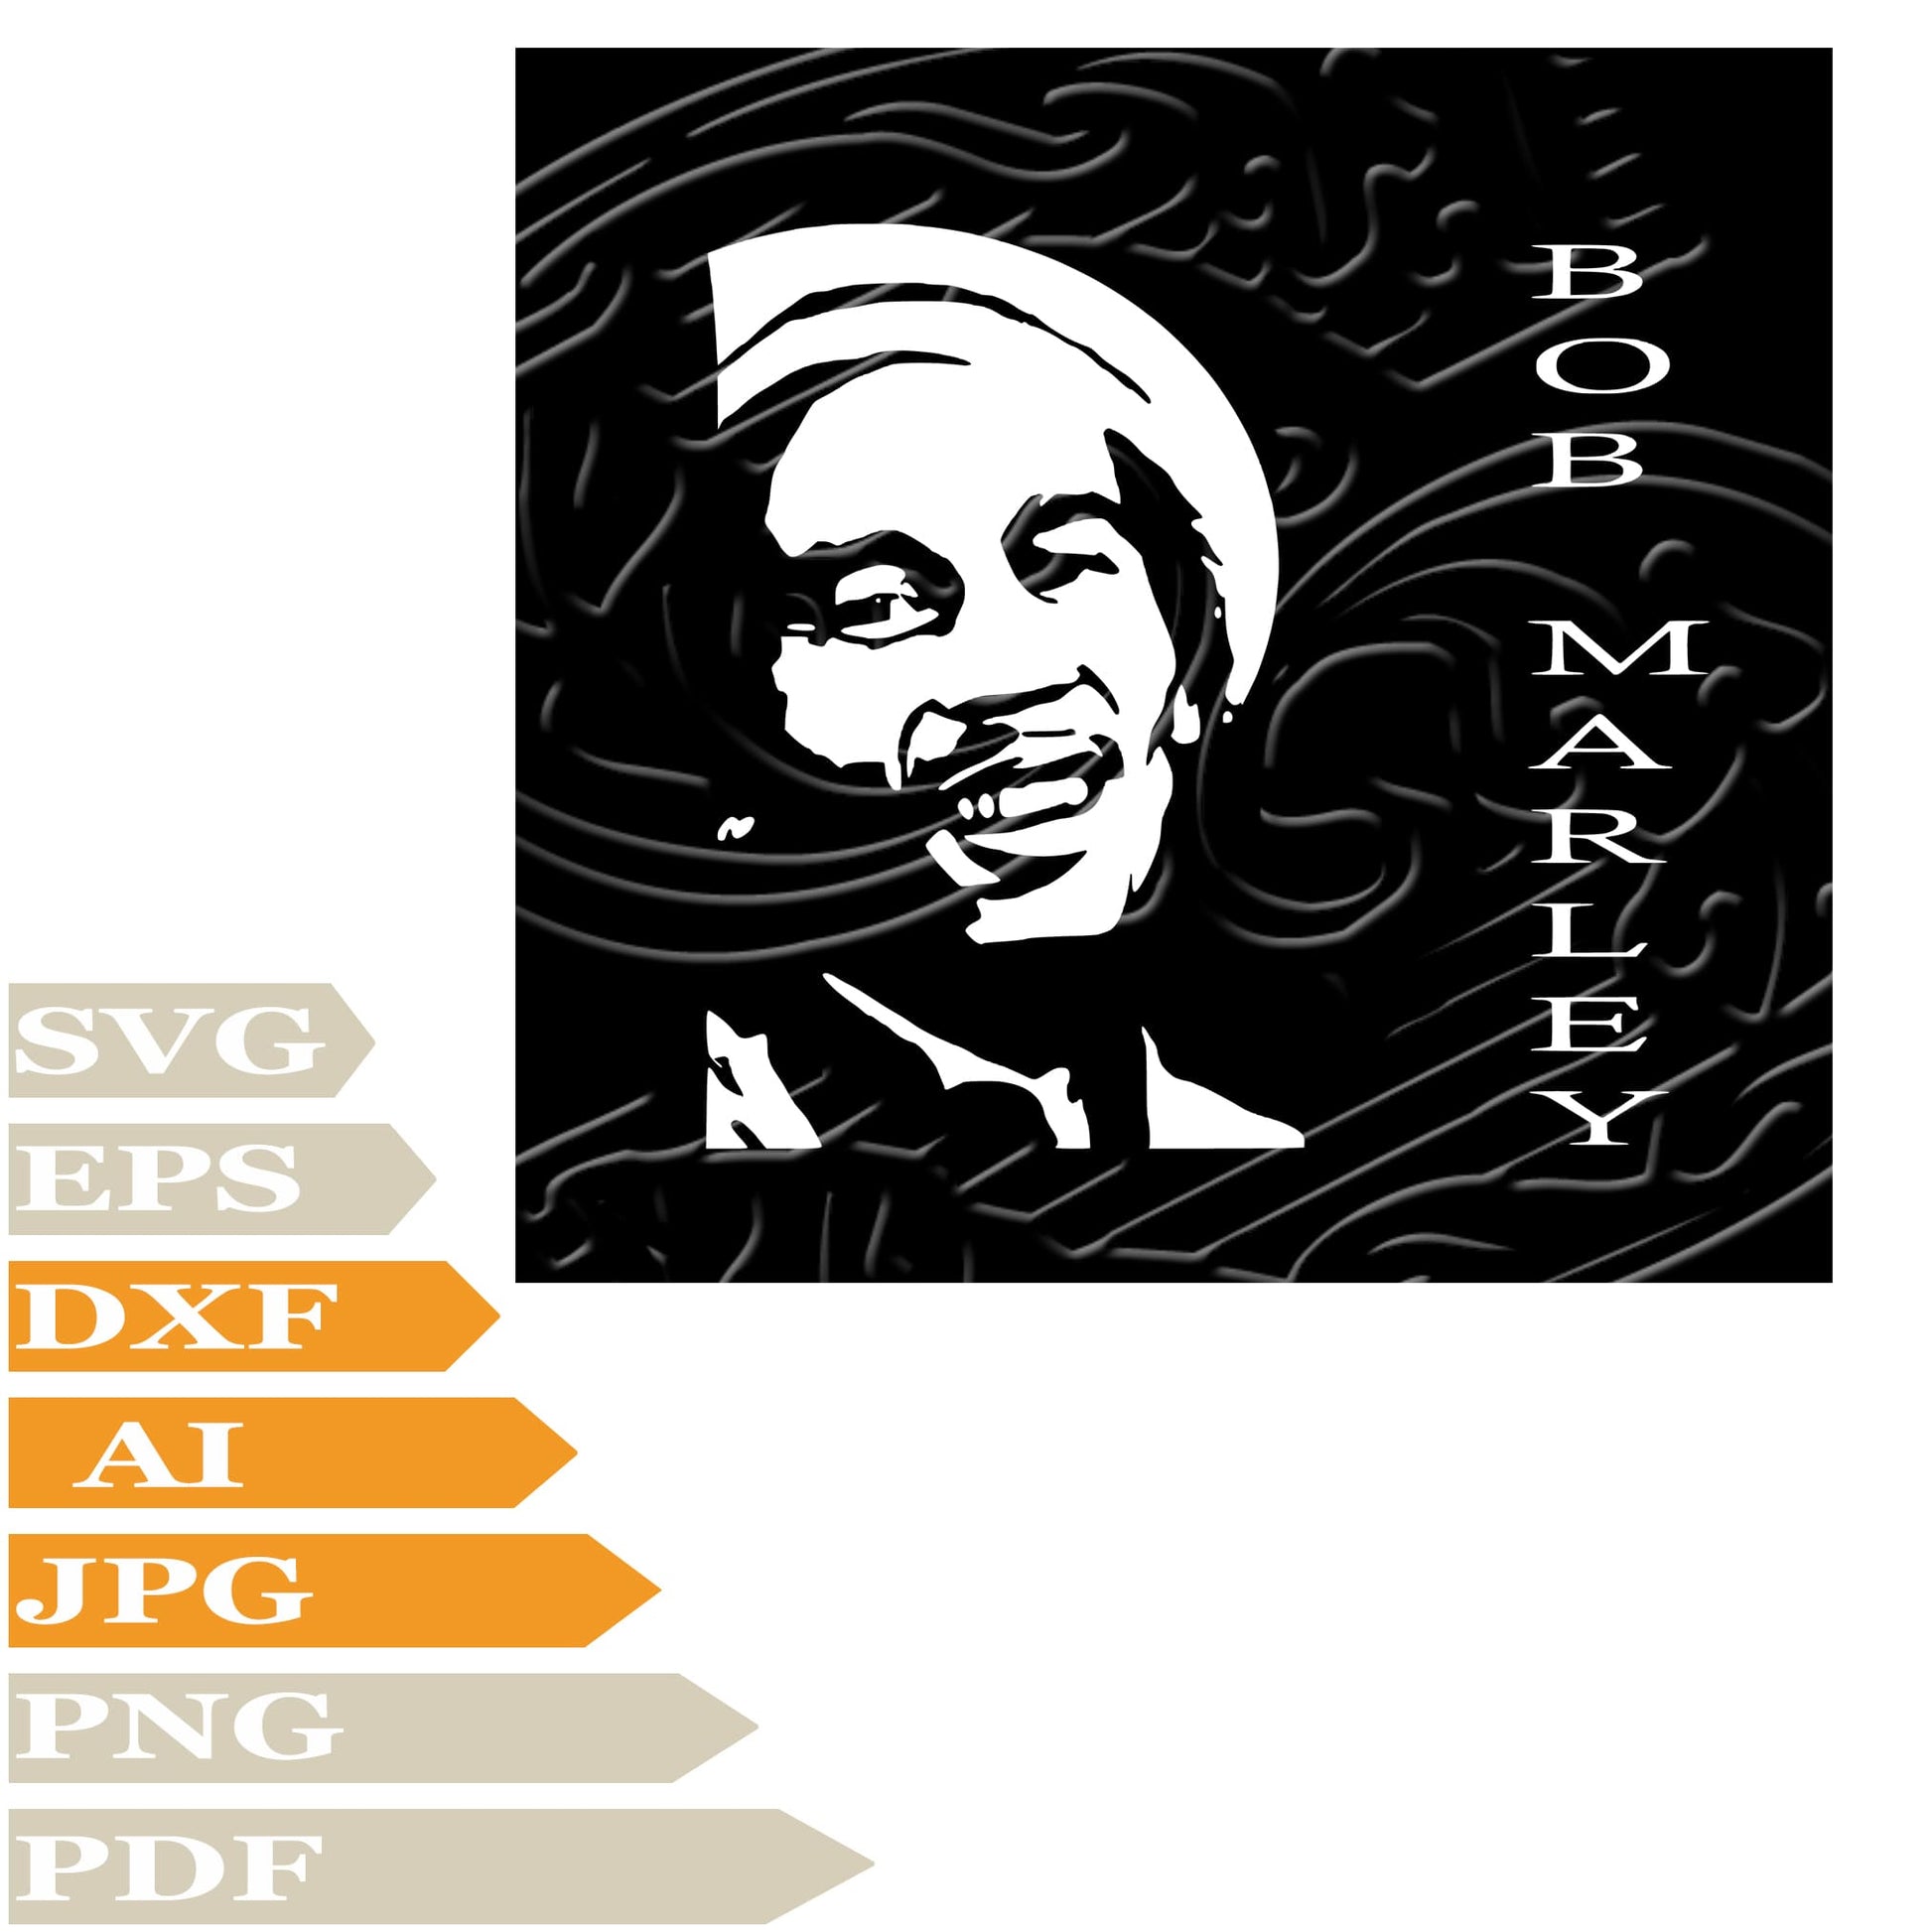 Bob Marley, Bob Marley One Love Svg File, Image Cut, Png, For Tattoo, Silhouette, Digital Vector Download, Cut File, Clipart, For Cricut